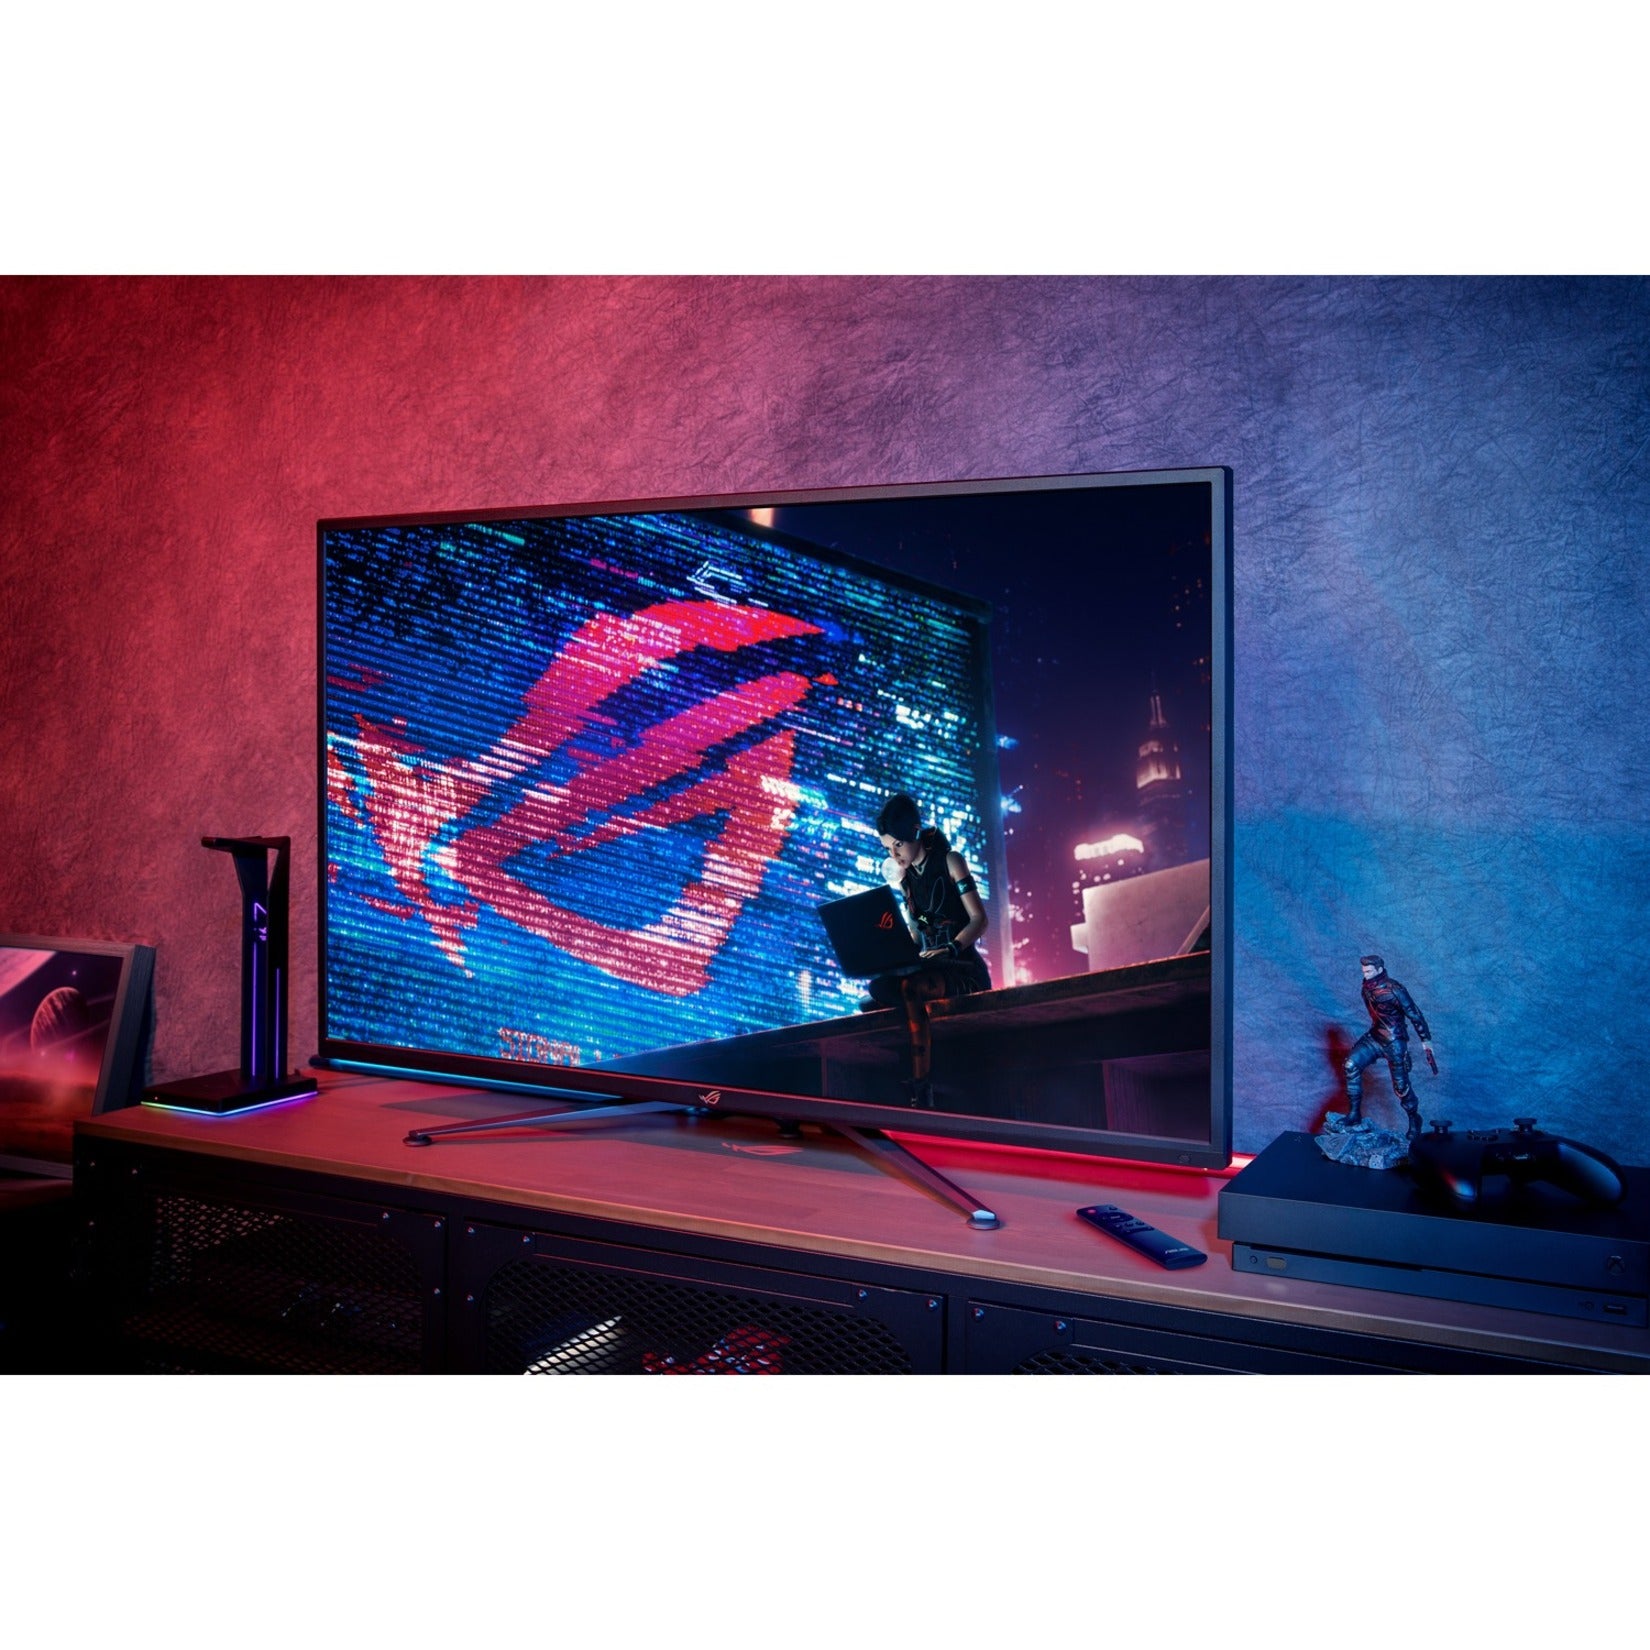 Asus ROG ' Swift `PG43UQ Widescreen Gaming LCD Monitor, 43" 4K HDR, 120Hz Refresh Rate, G-sync Compatible